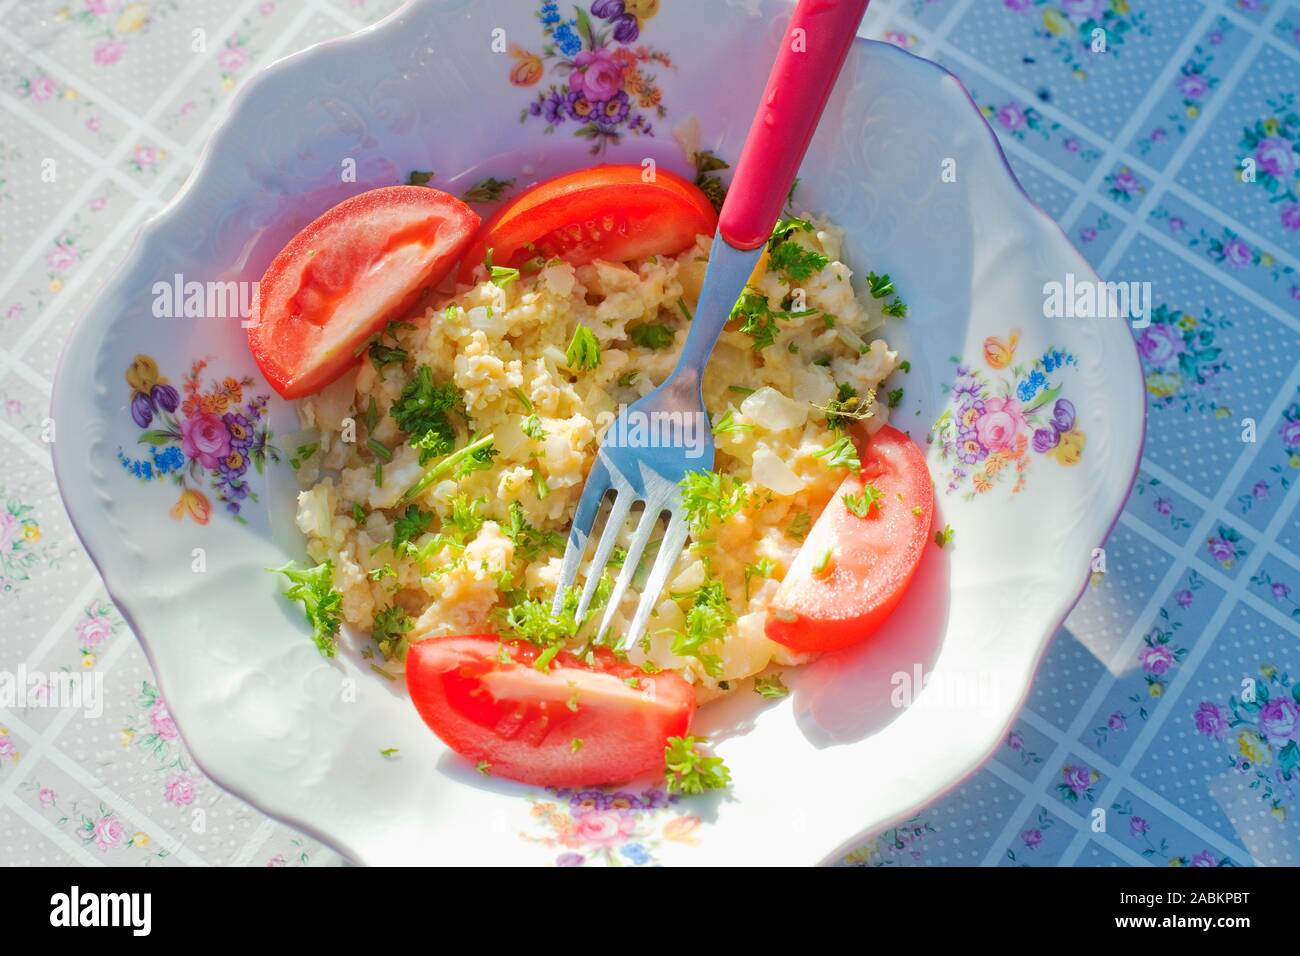 Scrambled eggs with vegetables. Stock Photo